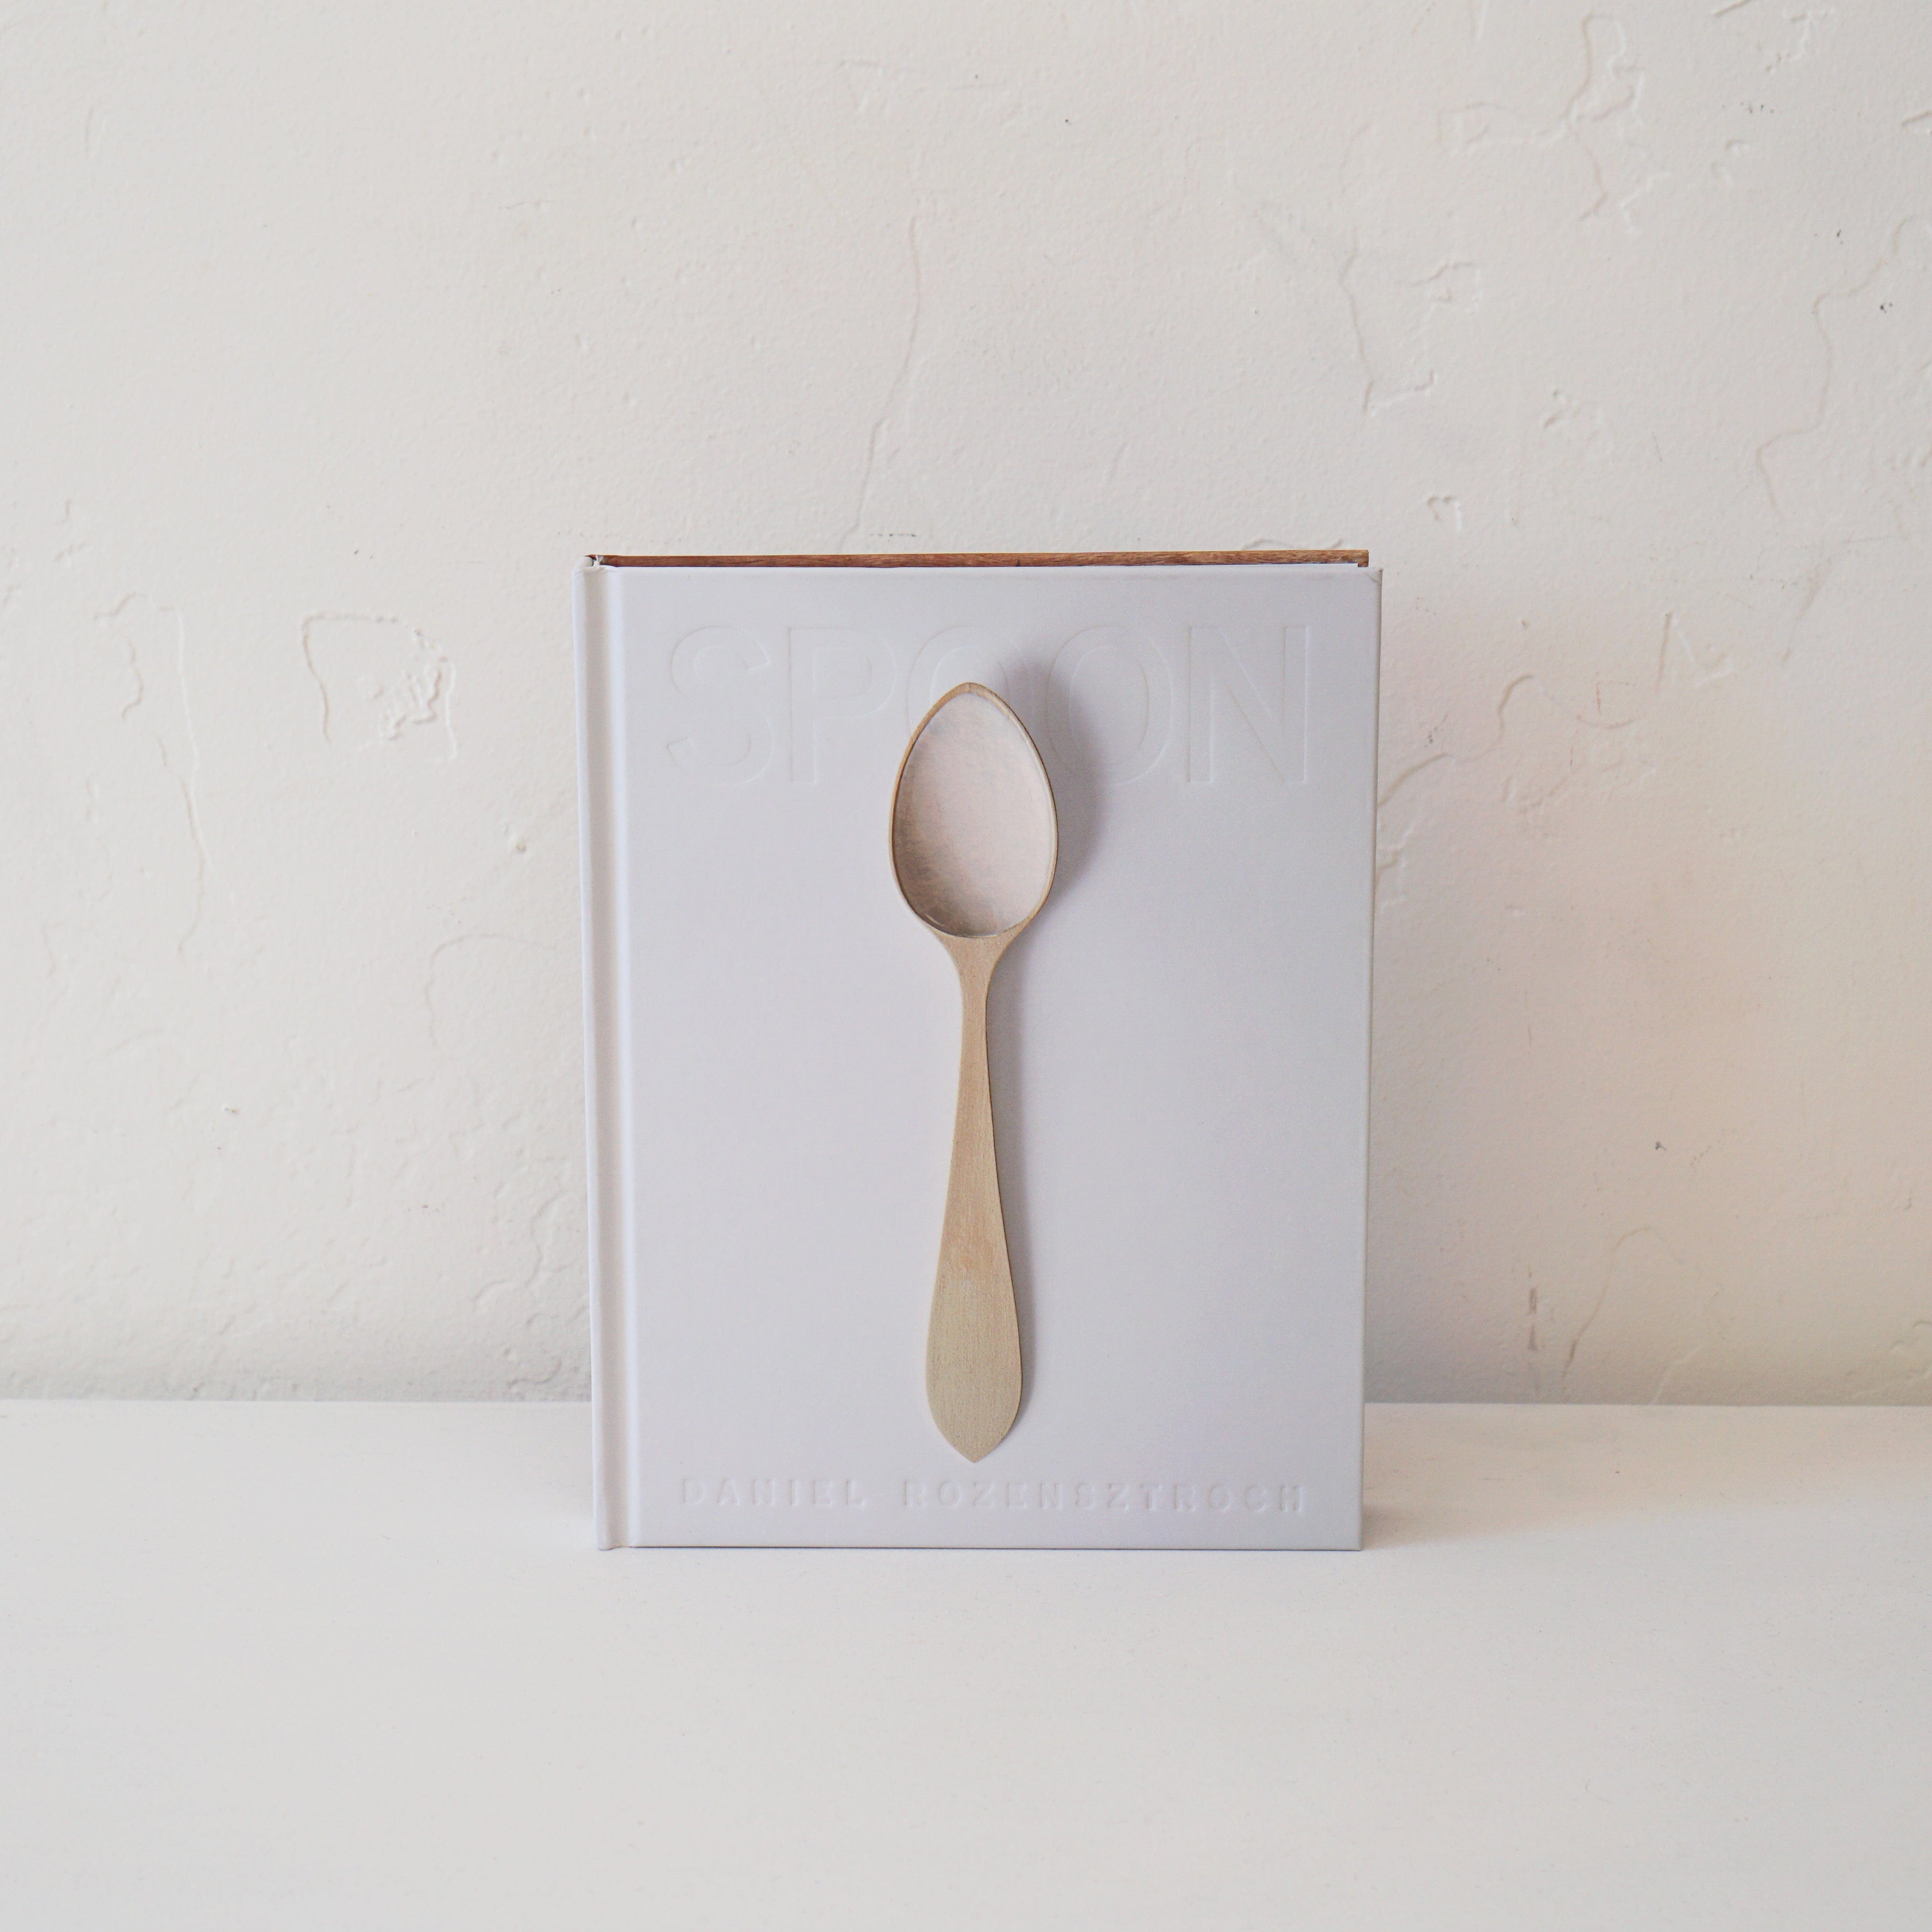 Pointed Leaf Press Books Spoon